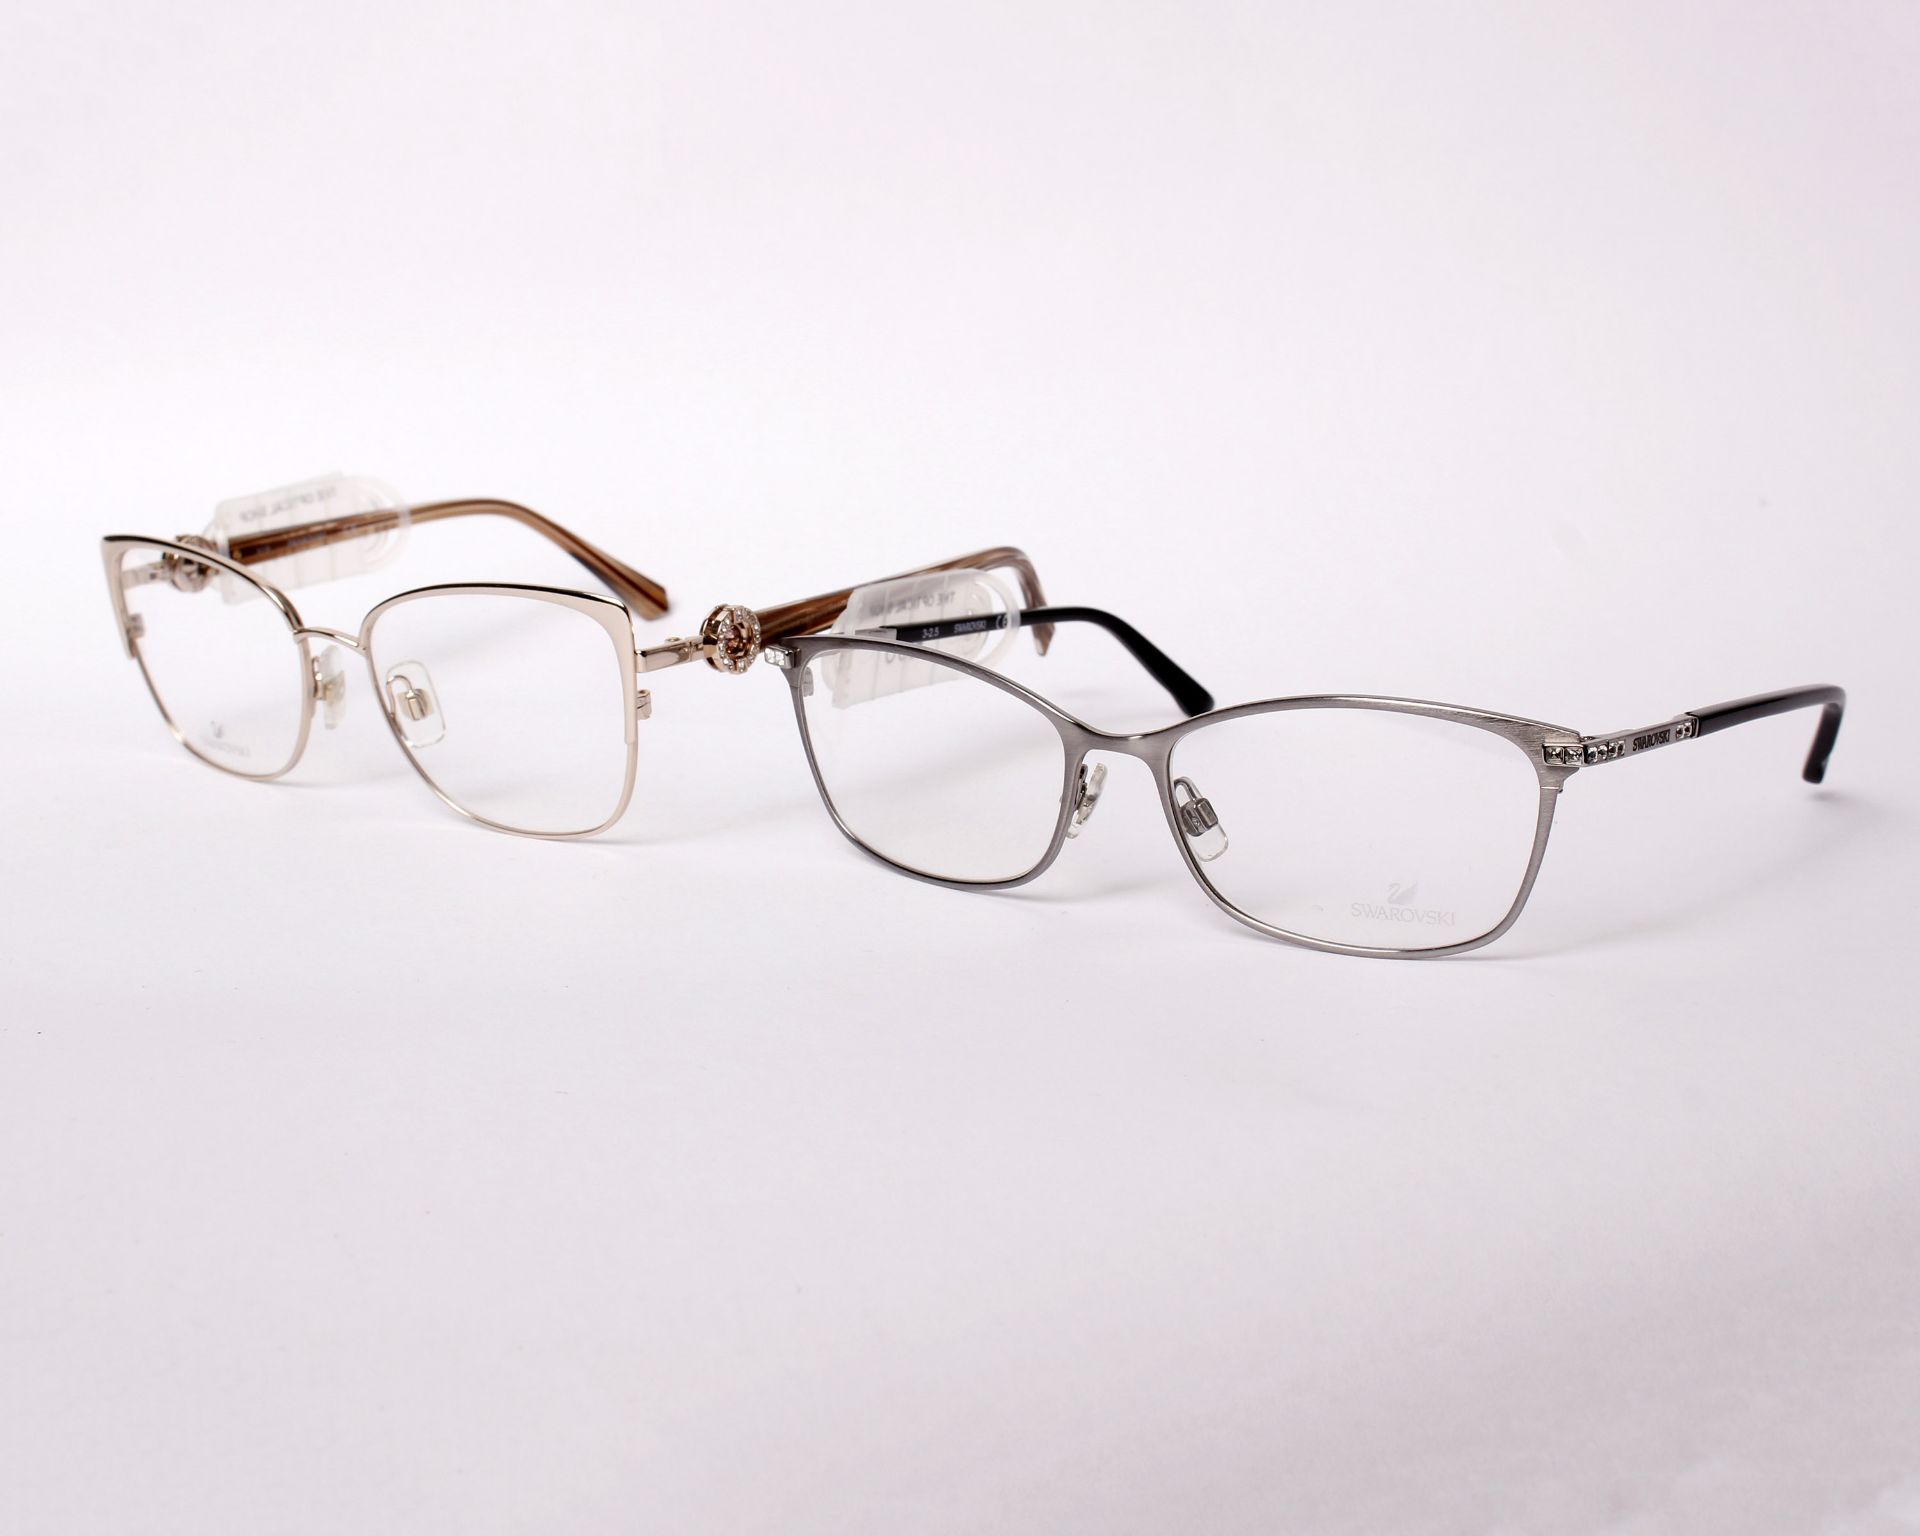 Two pairs of as new Swarovski glasses frames with clear glass (RRP £90 and £120). - Image 3 of 3